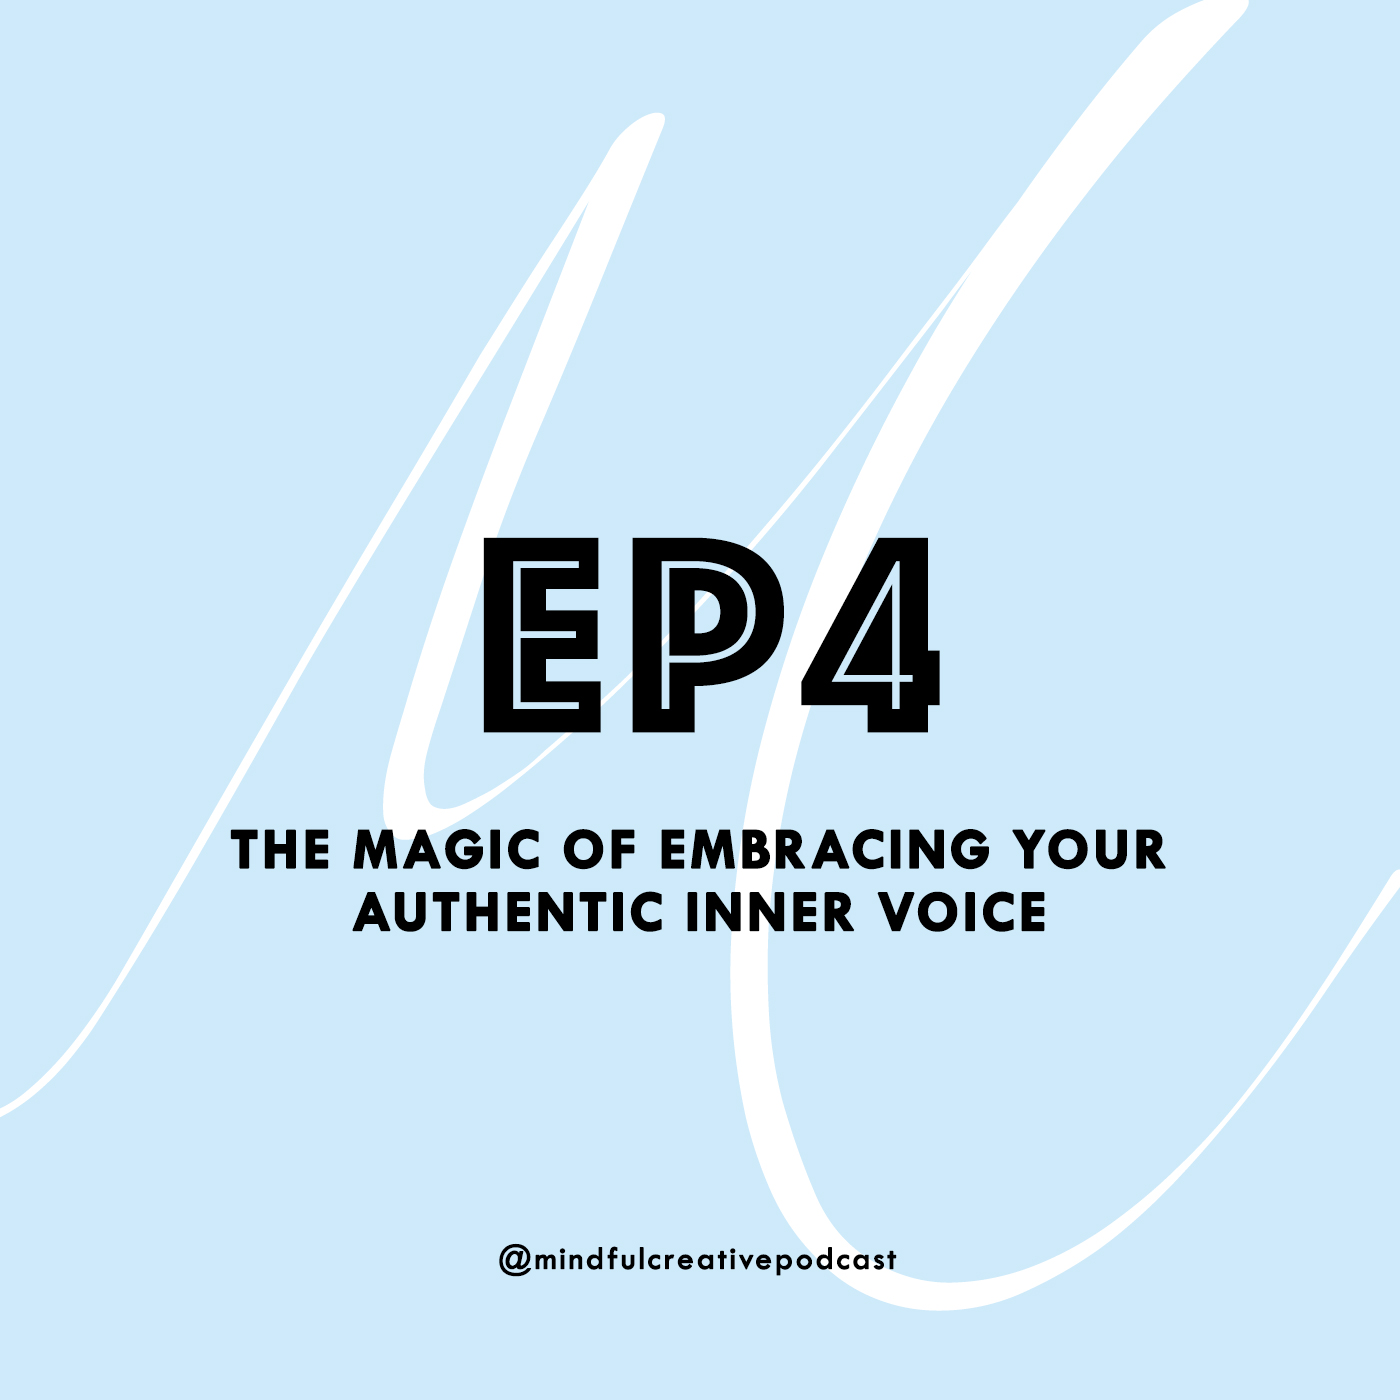 Episode 4 - The Magic of Embracing Your Authentic Inner Voice.